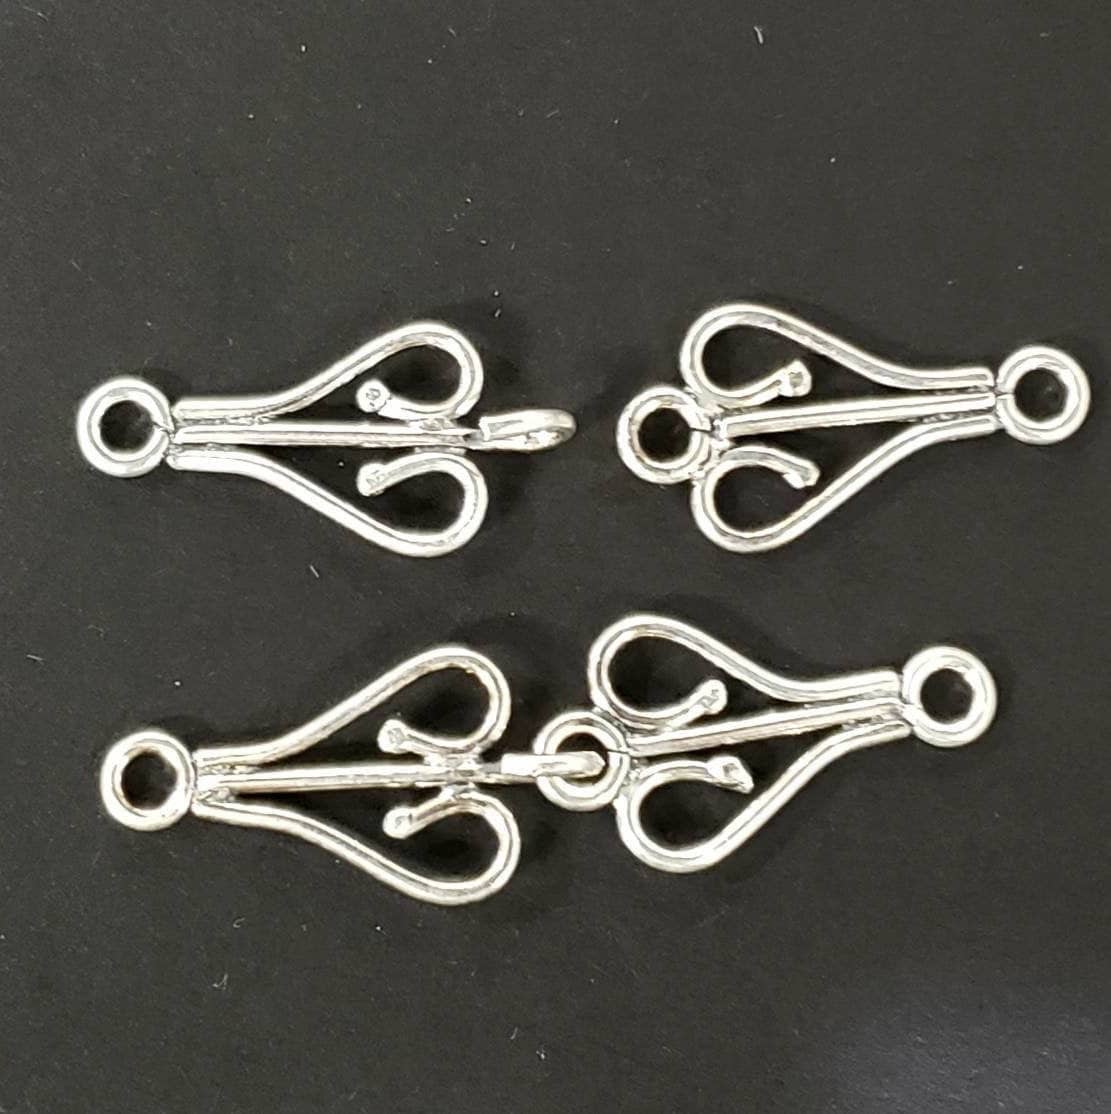 2 Sets 925 Sterling Silver Bali Hook and Eye Clasp. Jewelry Making, 25mm Hook & 25mm Eye